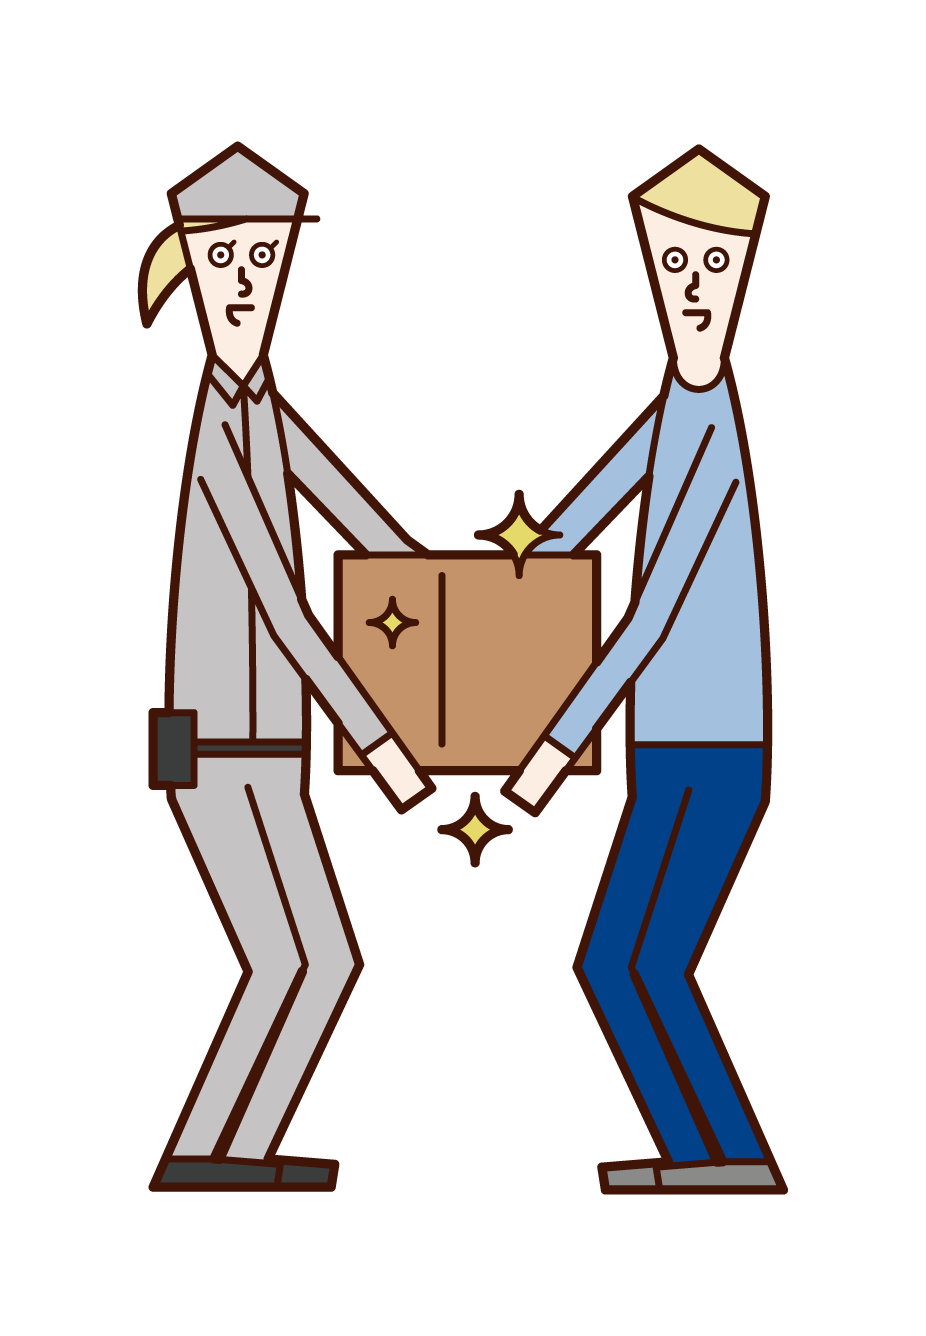 Illustration of a delivery driver (woman) handing over a package